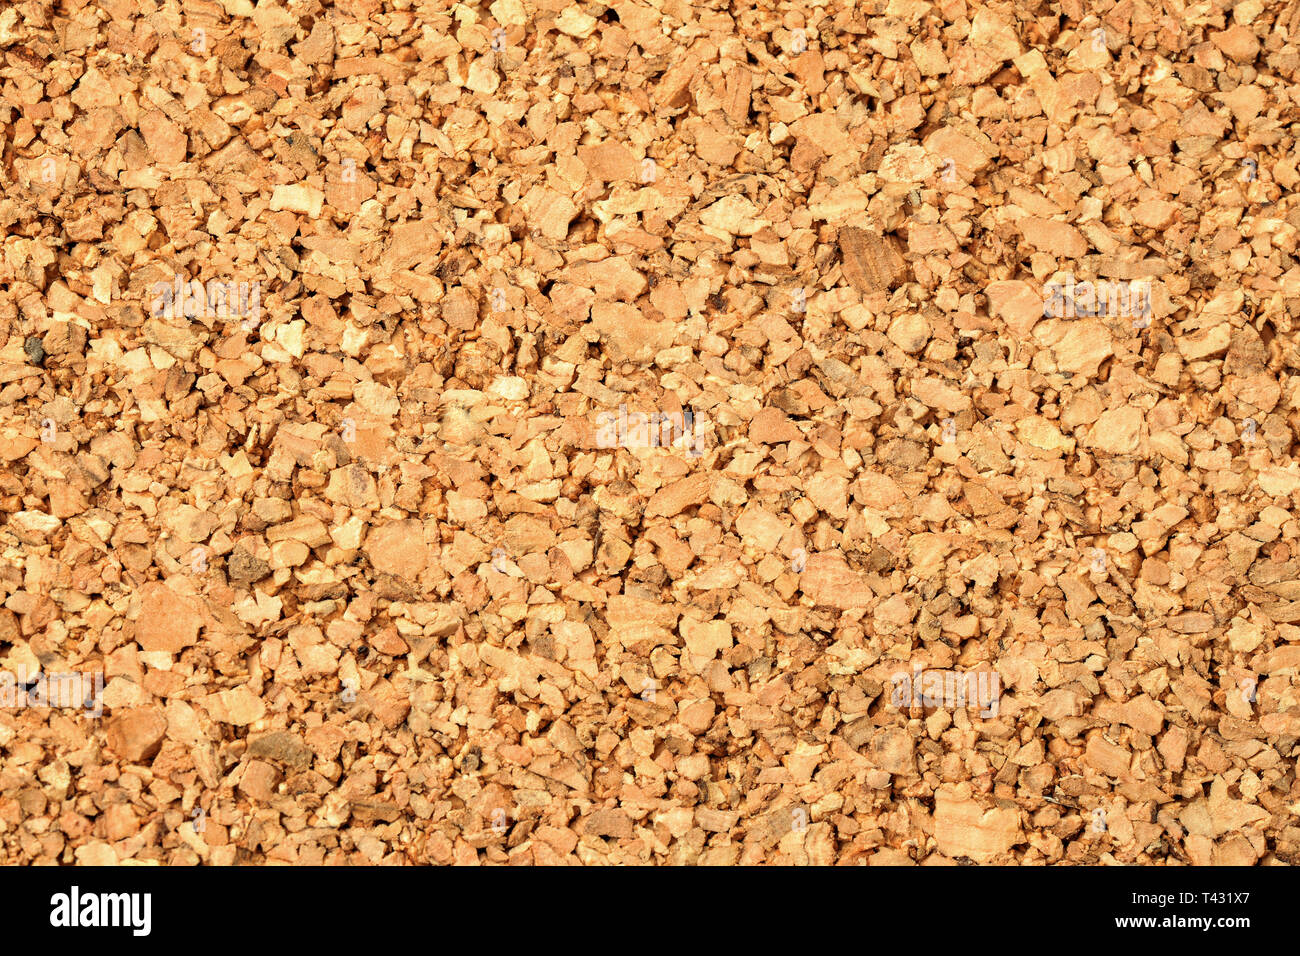 Close up of empty natural cork board texture Stock Photo